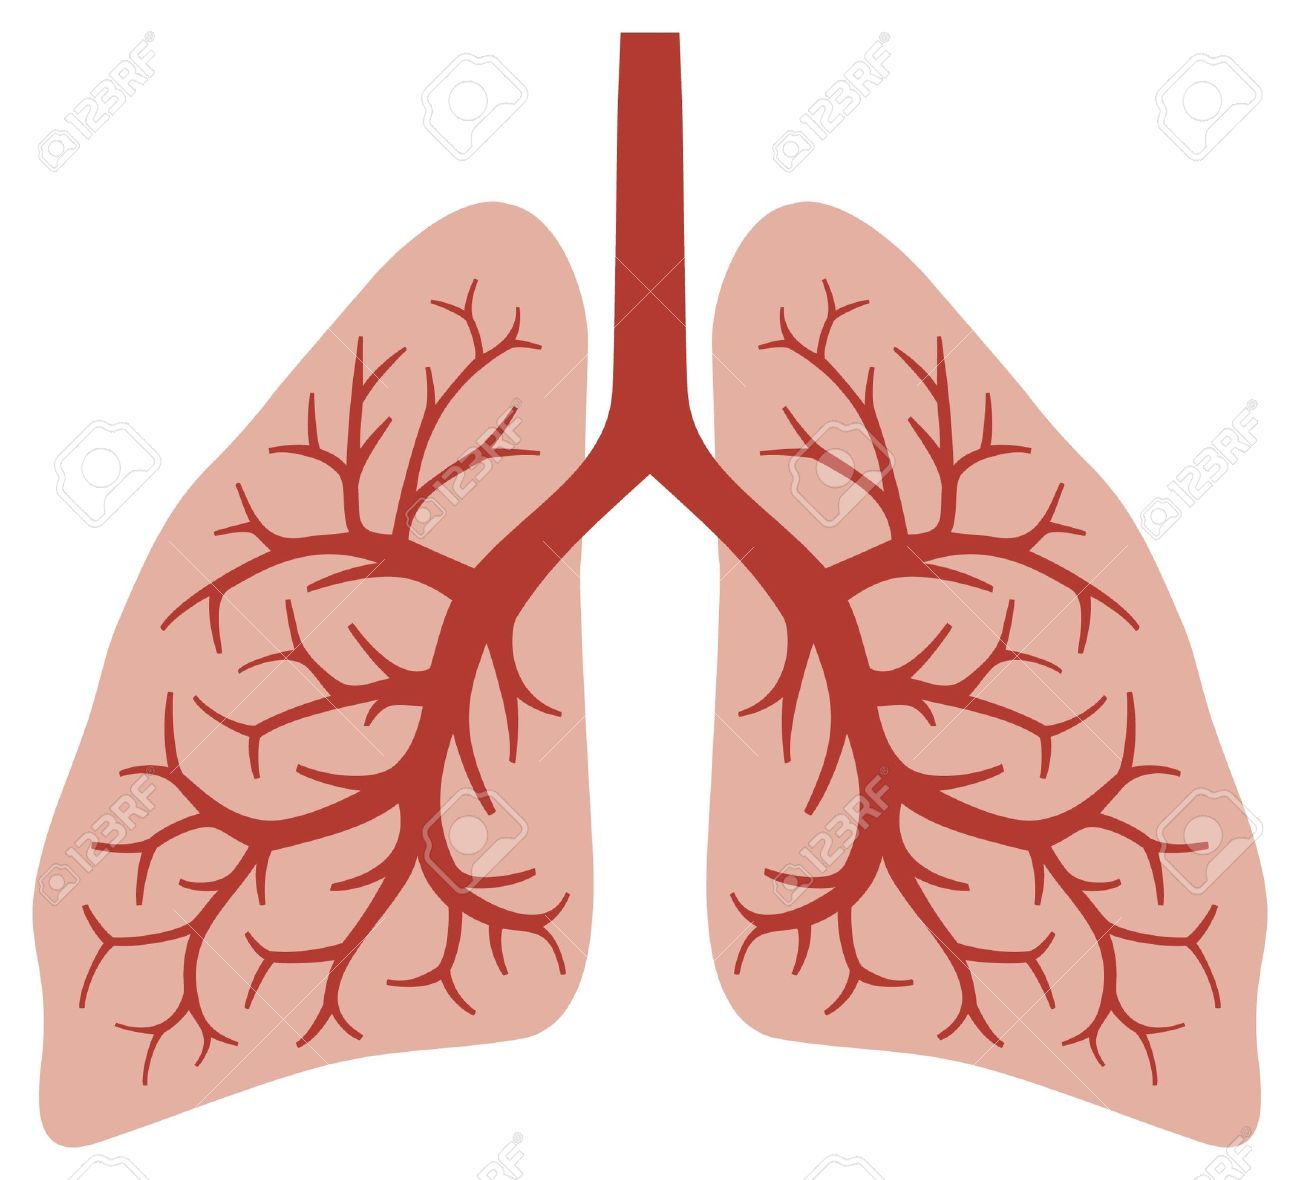 Stock vector crafts anatomy. Lungs clipart human lung